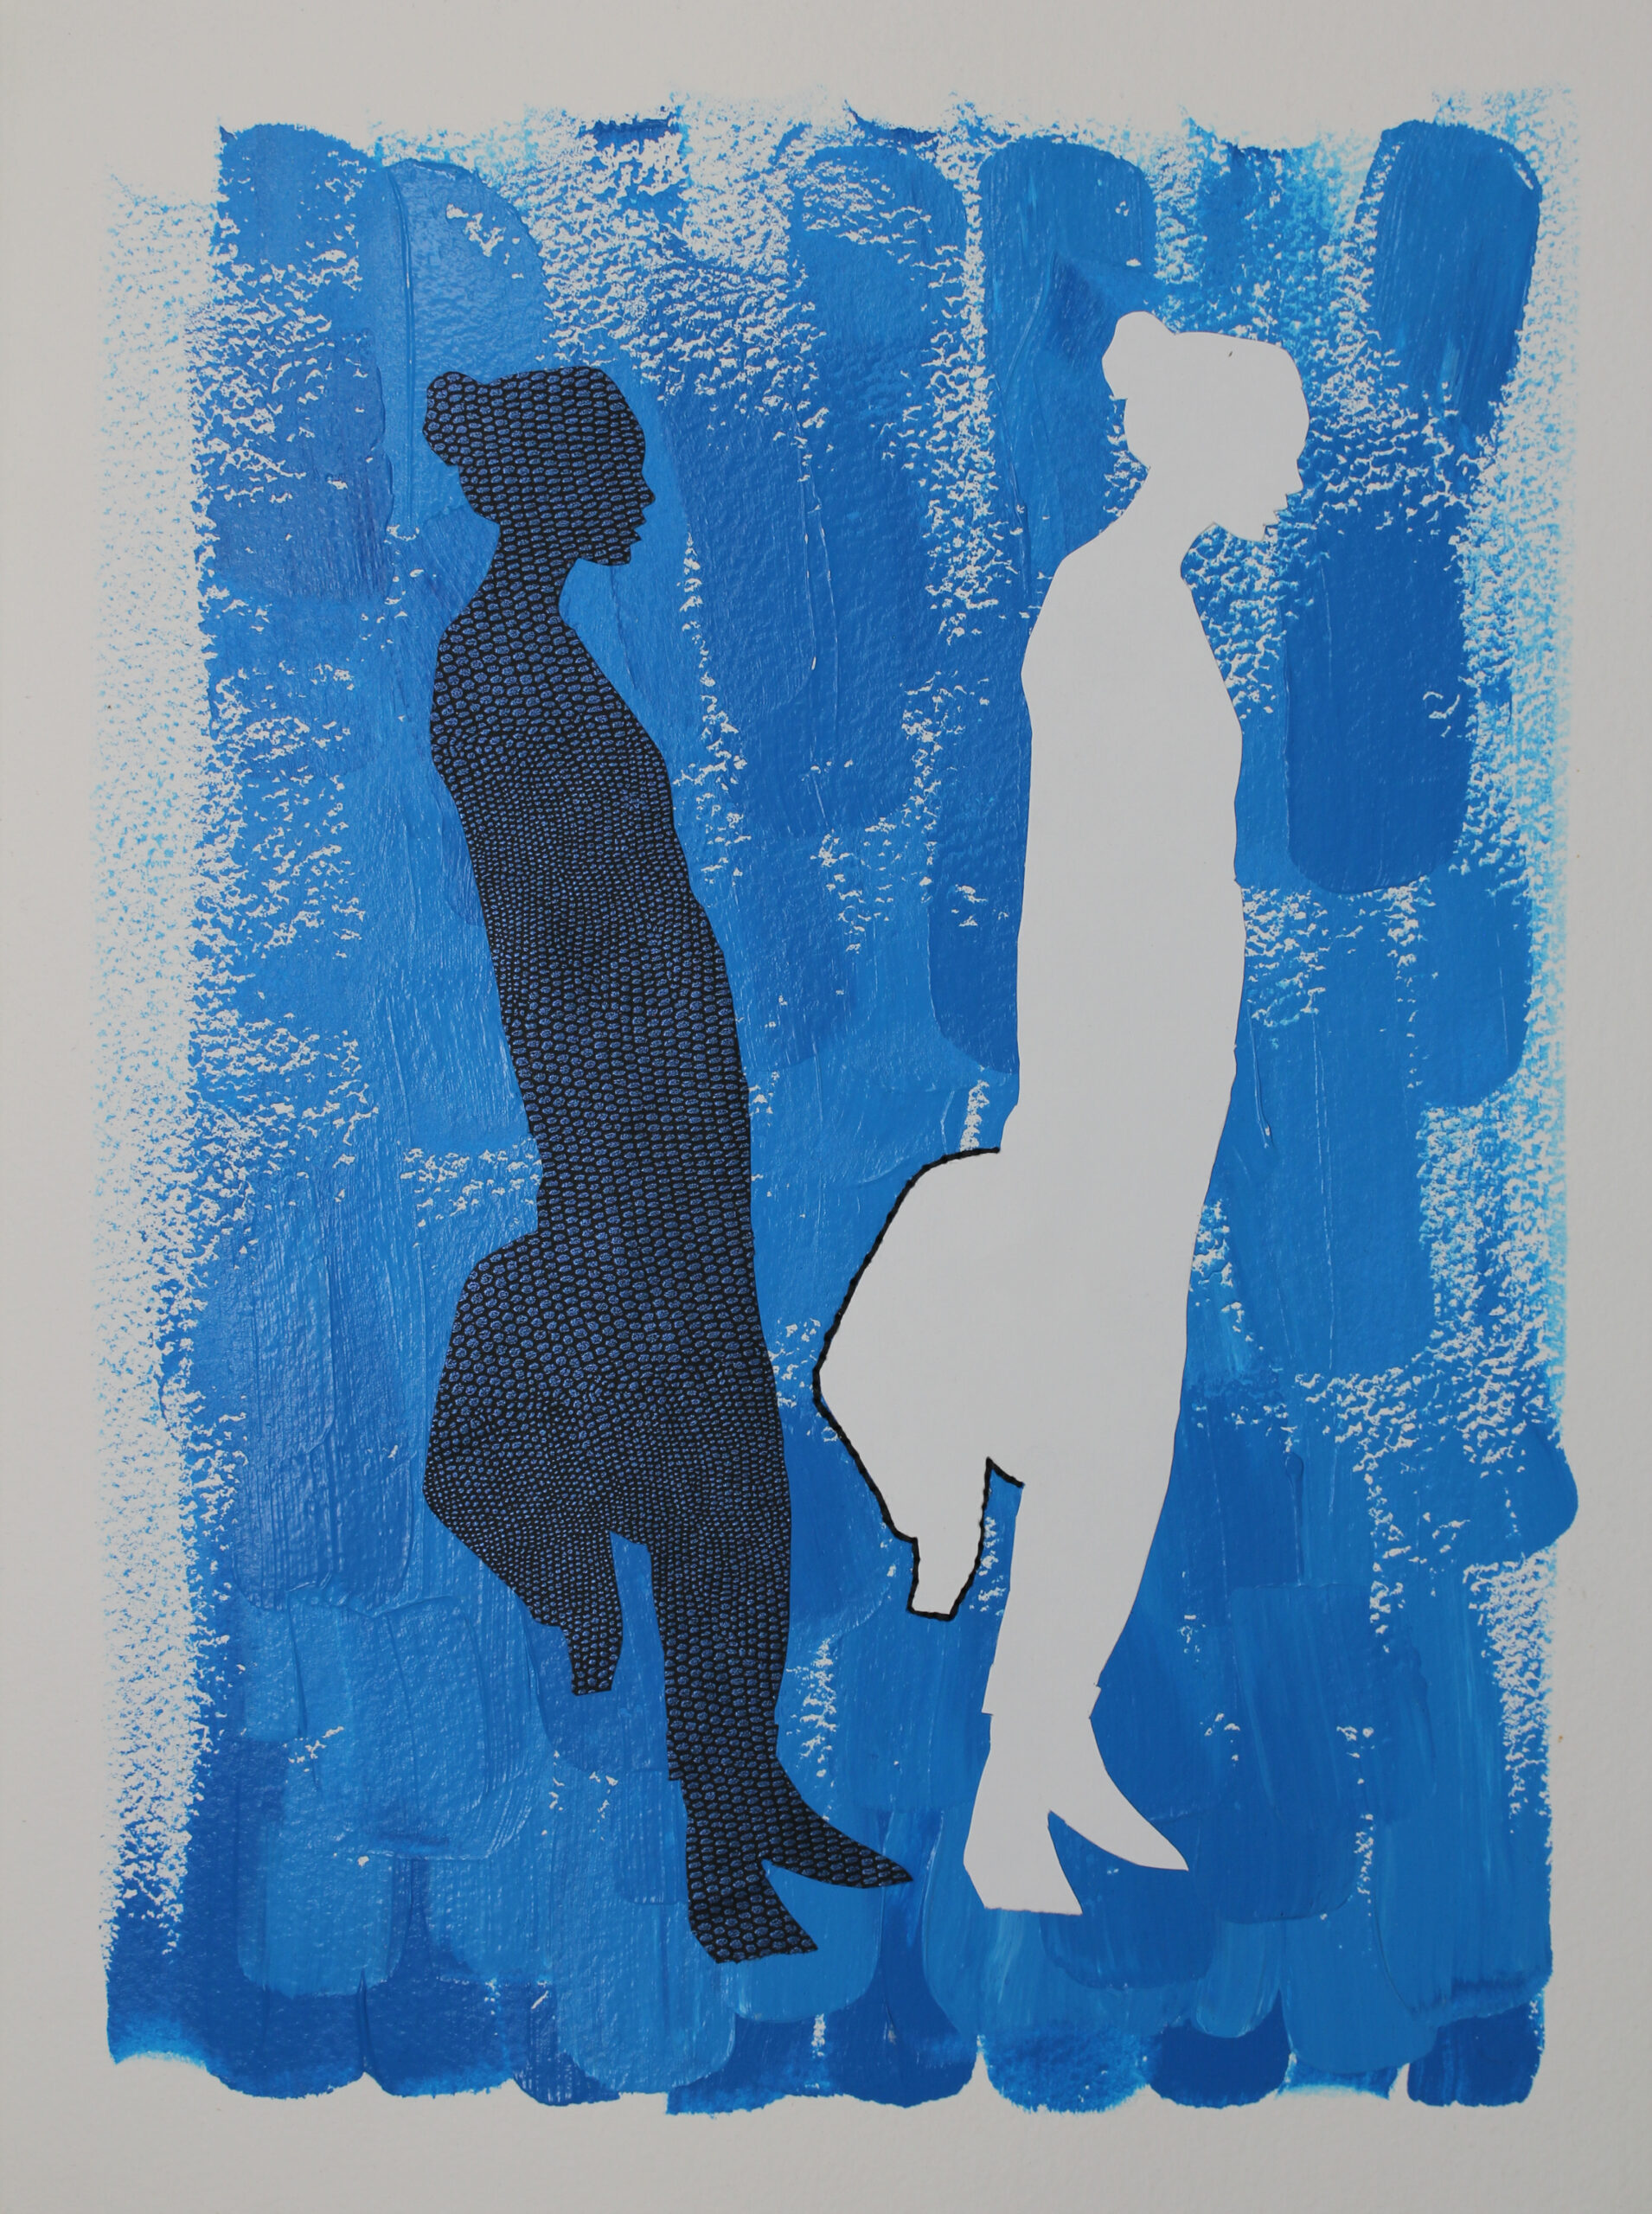 Two silhouettes against blue brush strokes, one dark and one light.